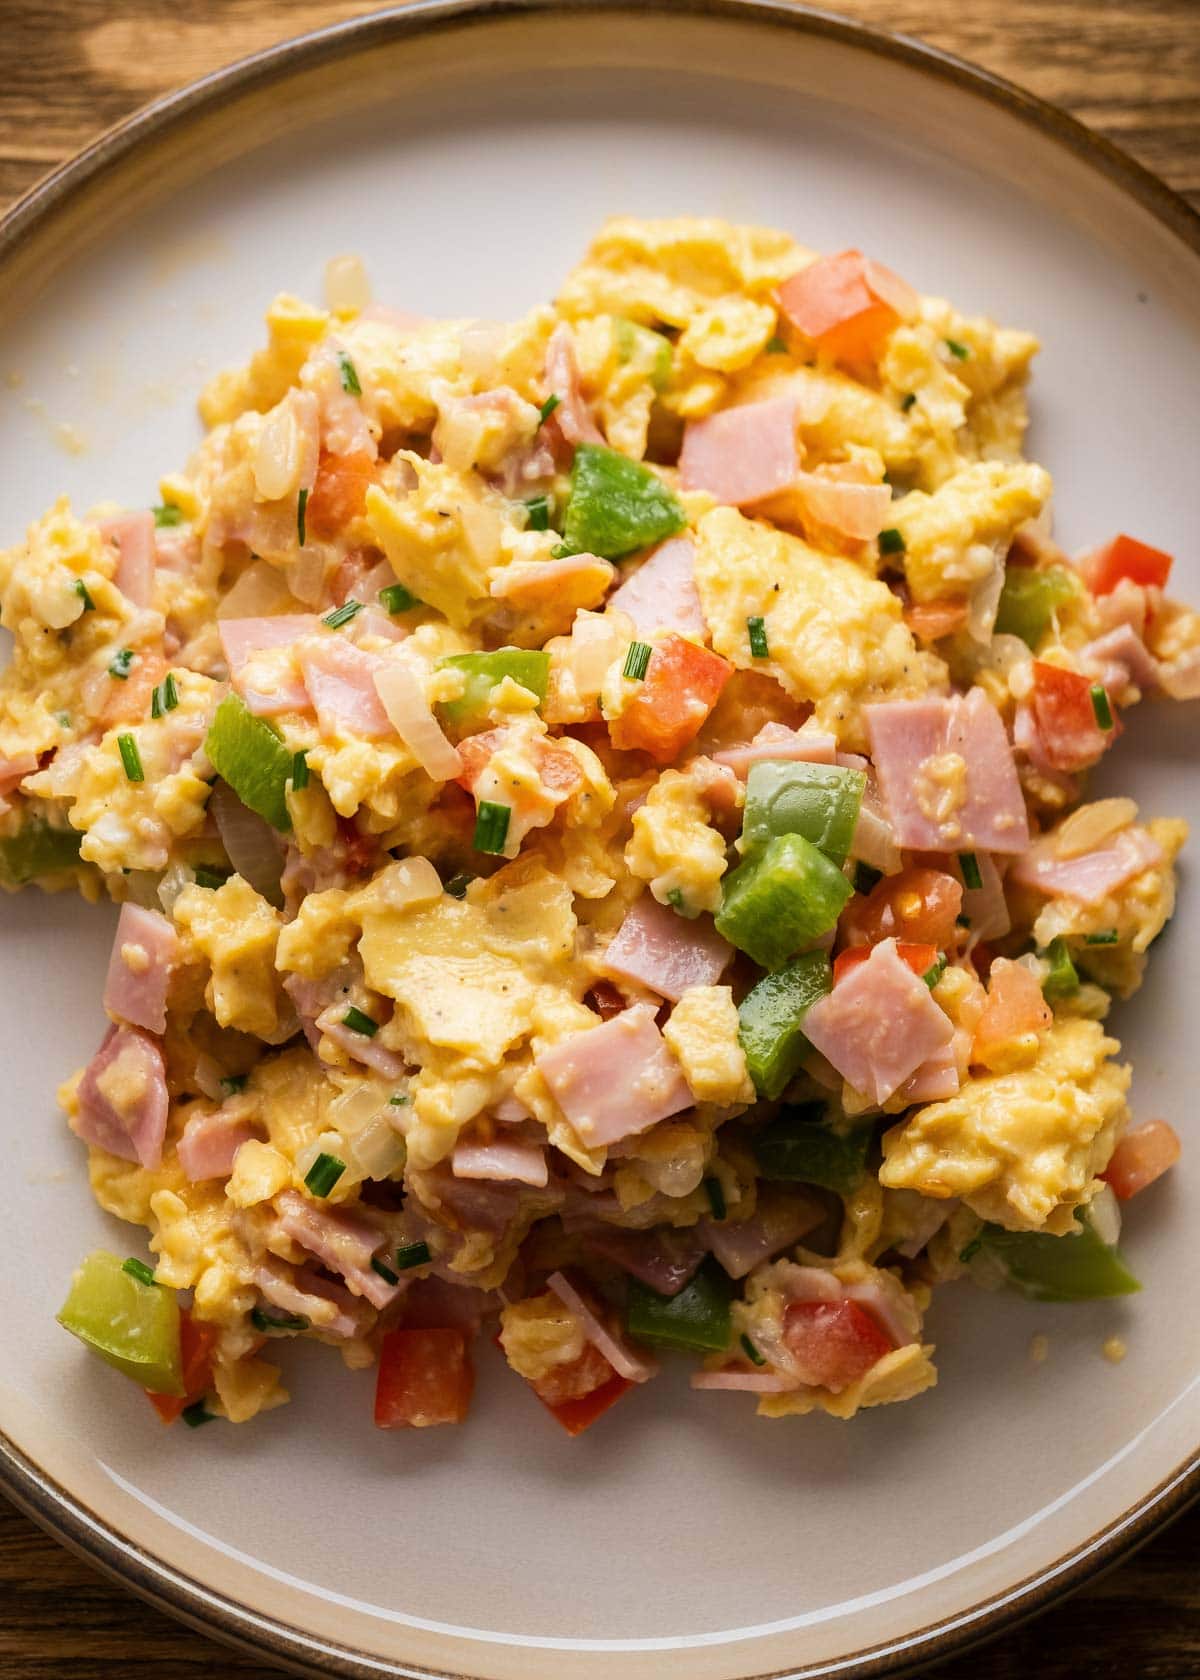 a plateful of scrambled eggs with vegetables